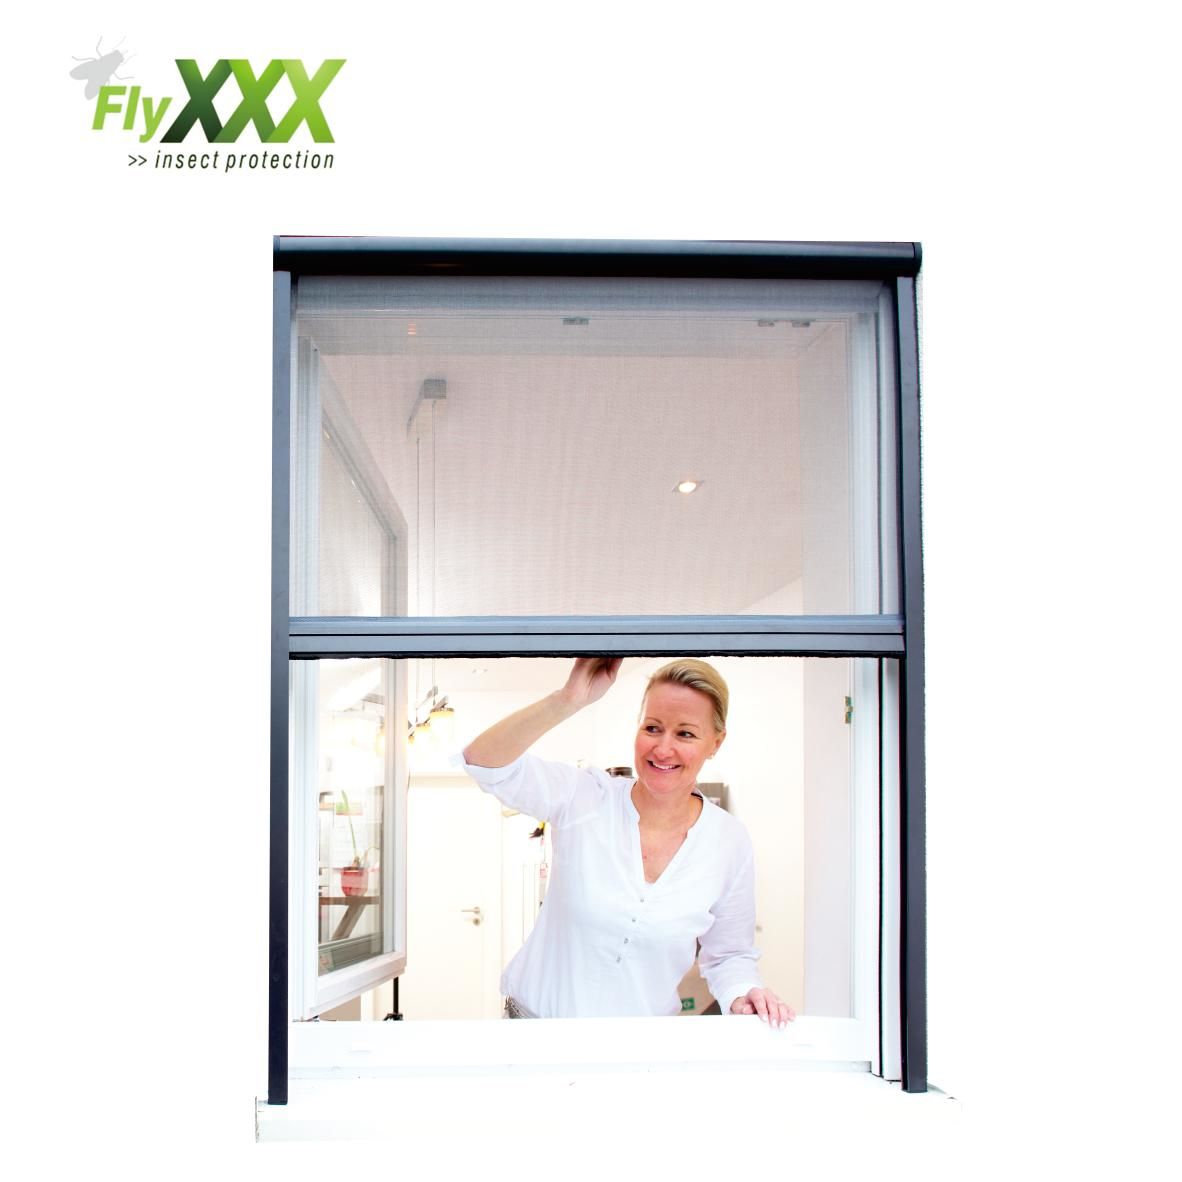 What should I pay attention to when choosing invisible screen windows?